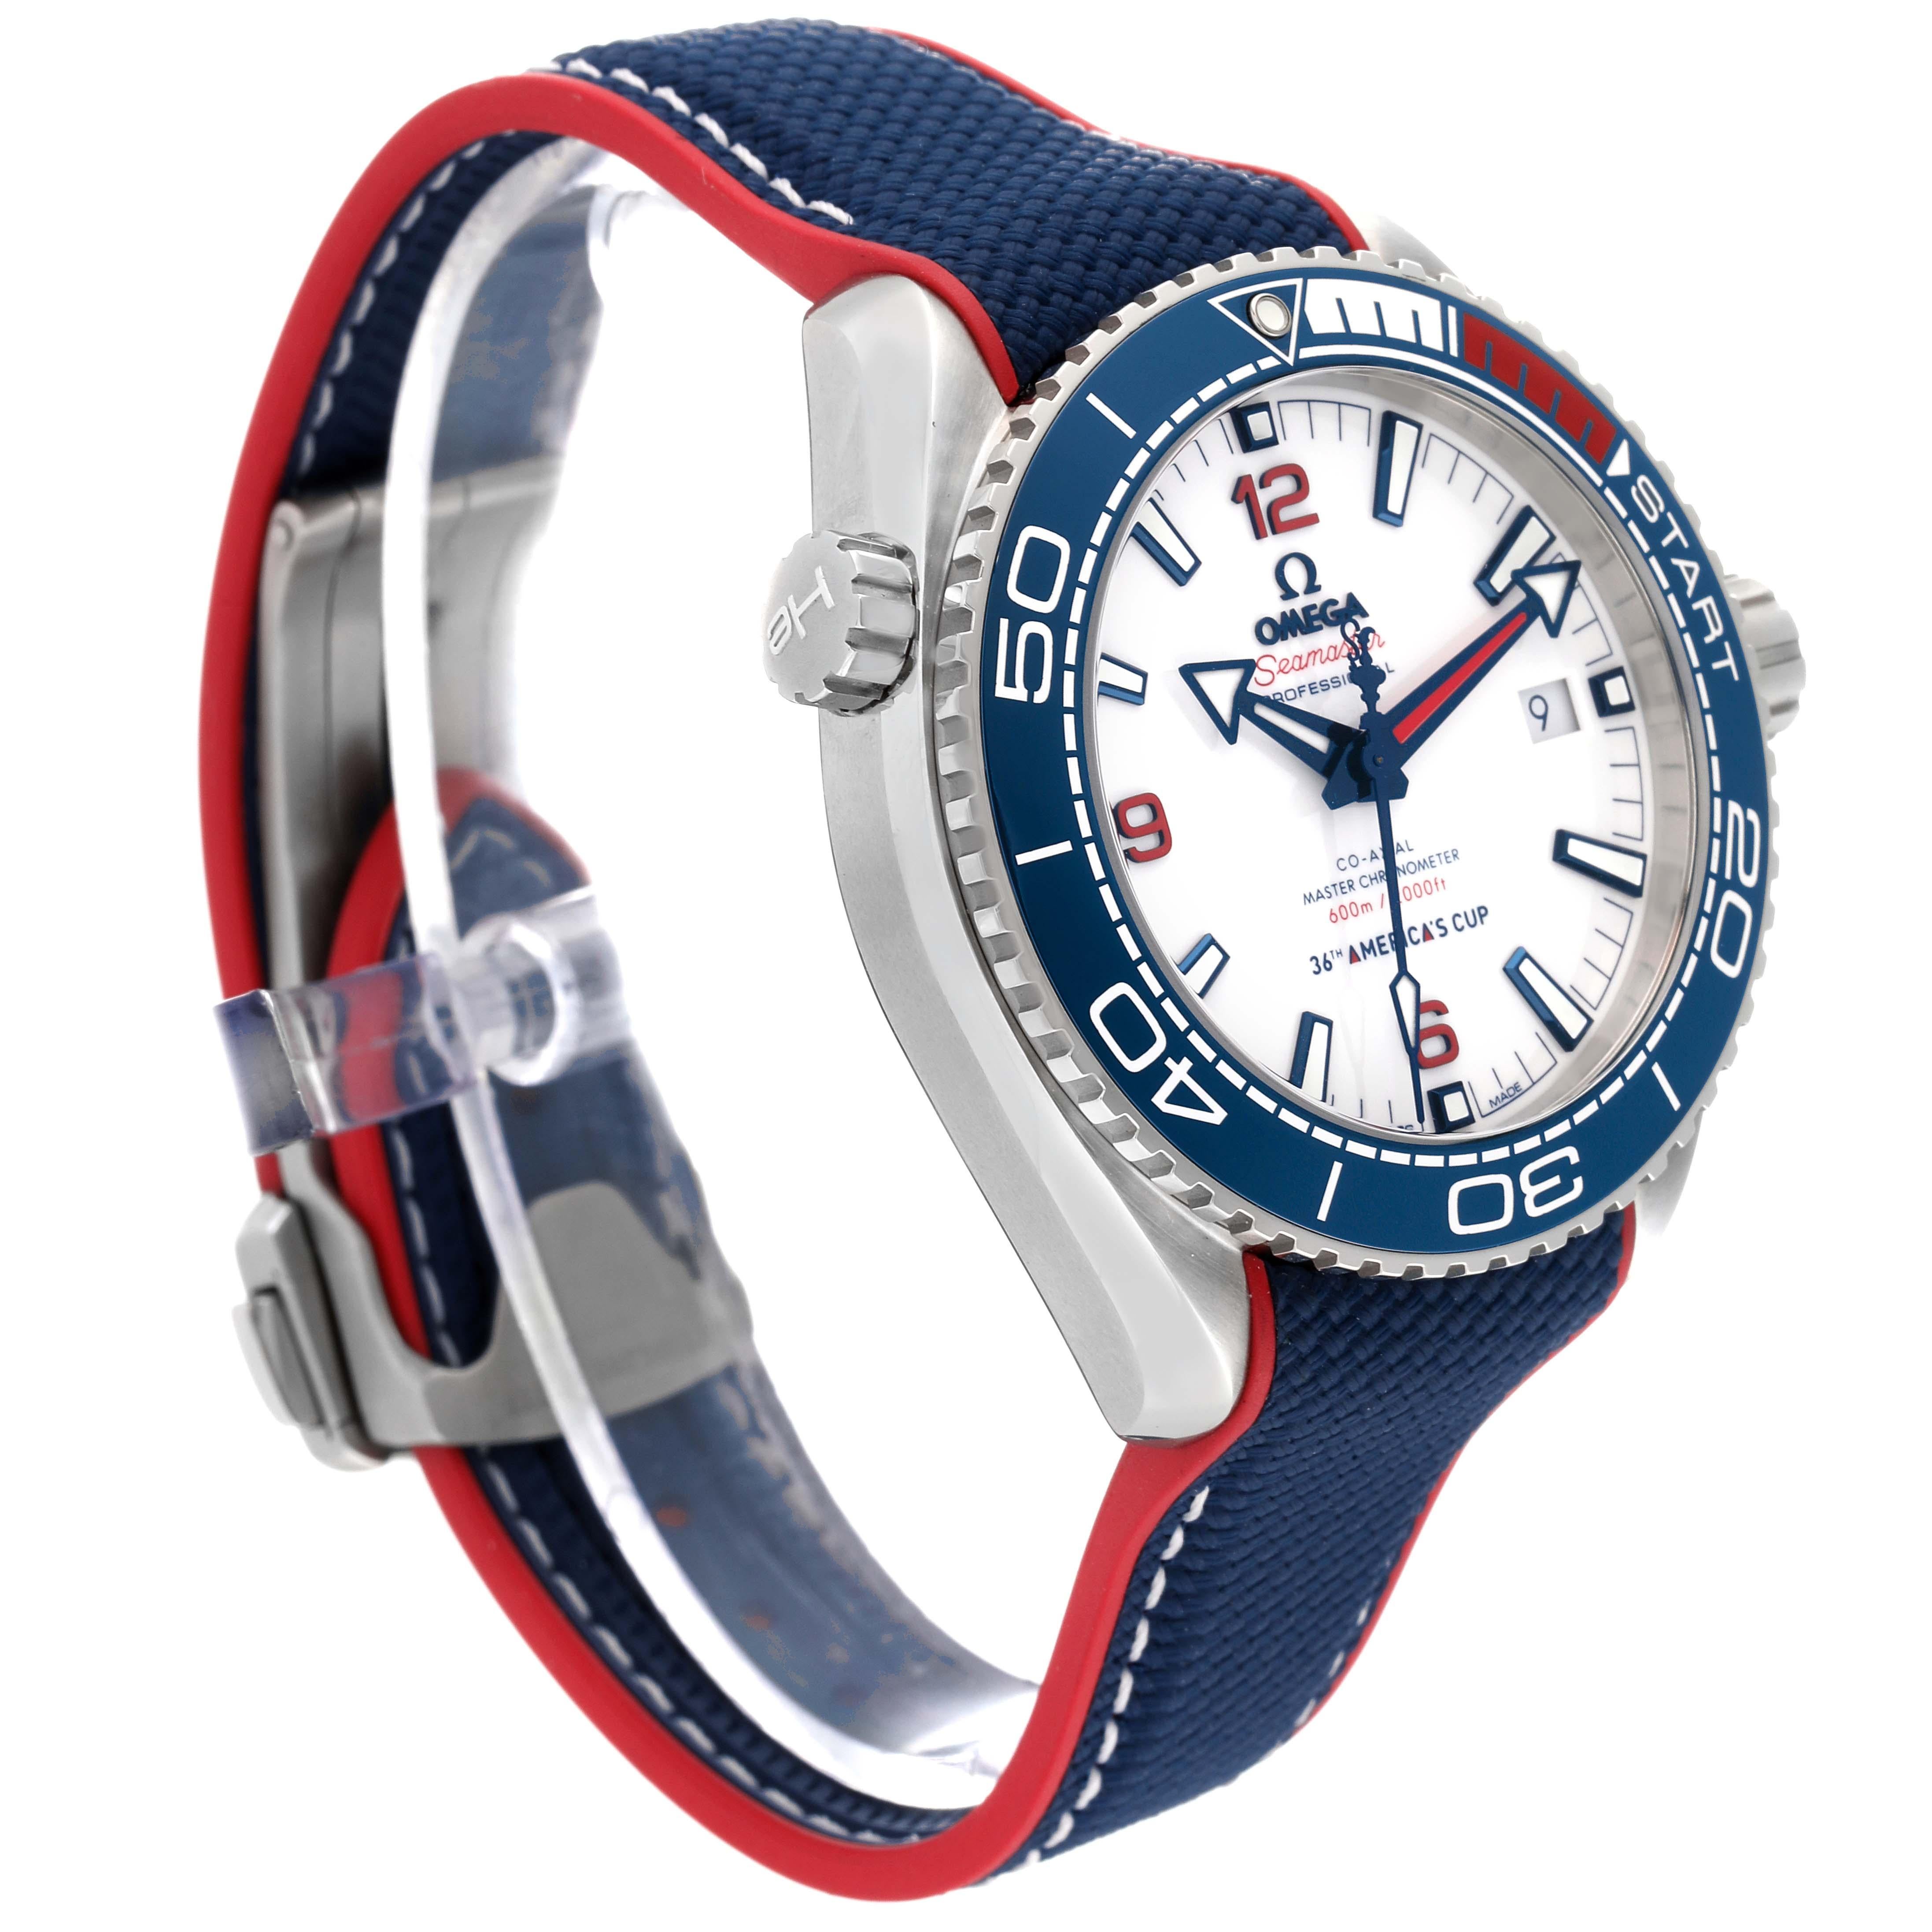 Omega Seamaster Planet Ocean America Cup Limited Edition Watch 1